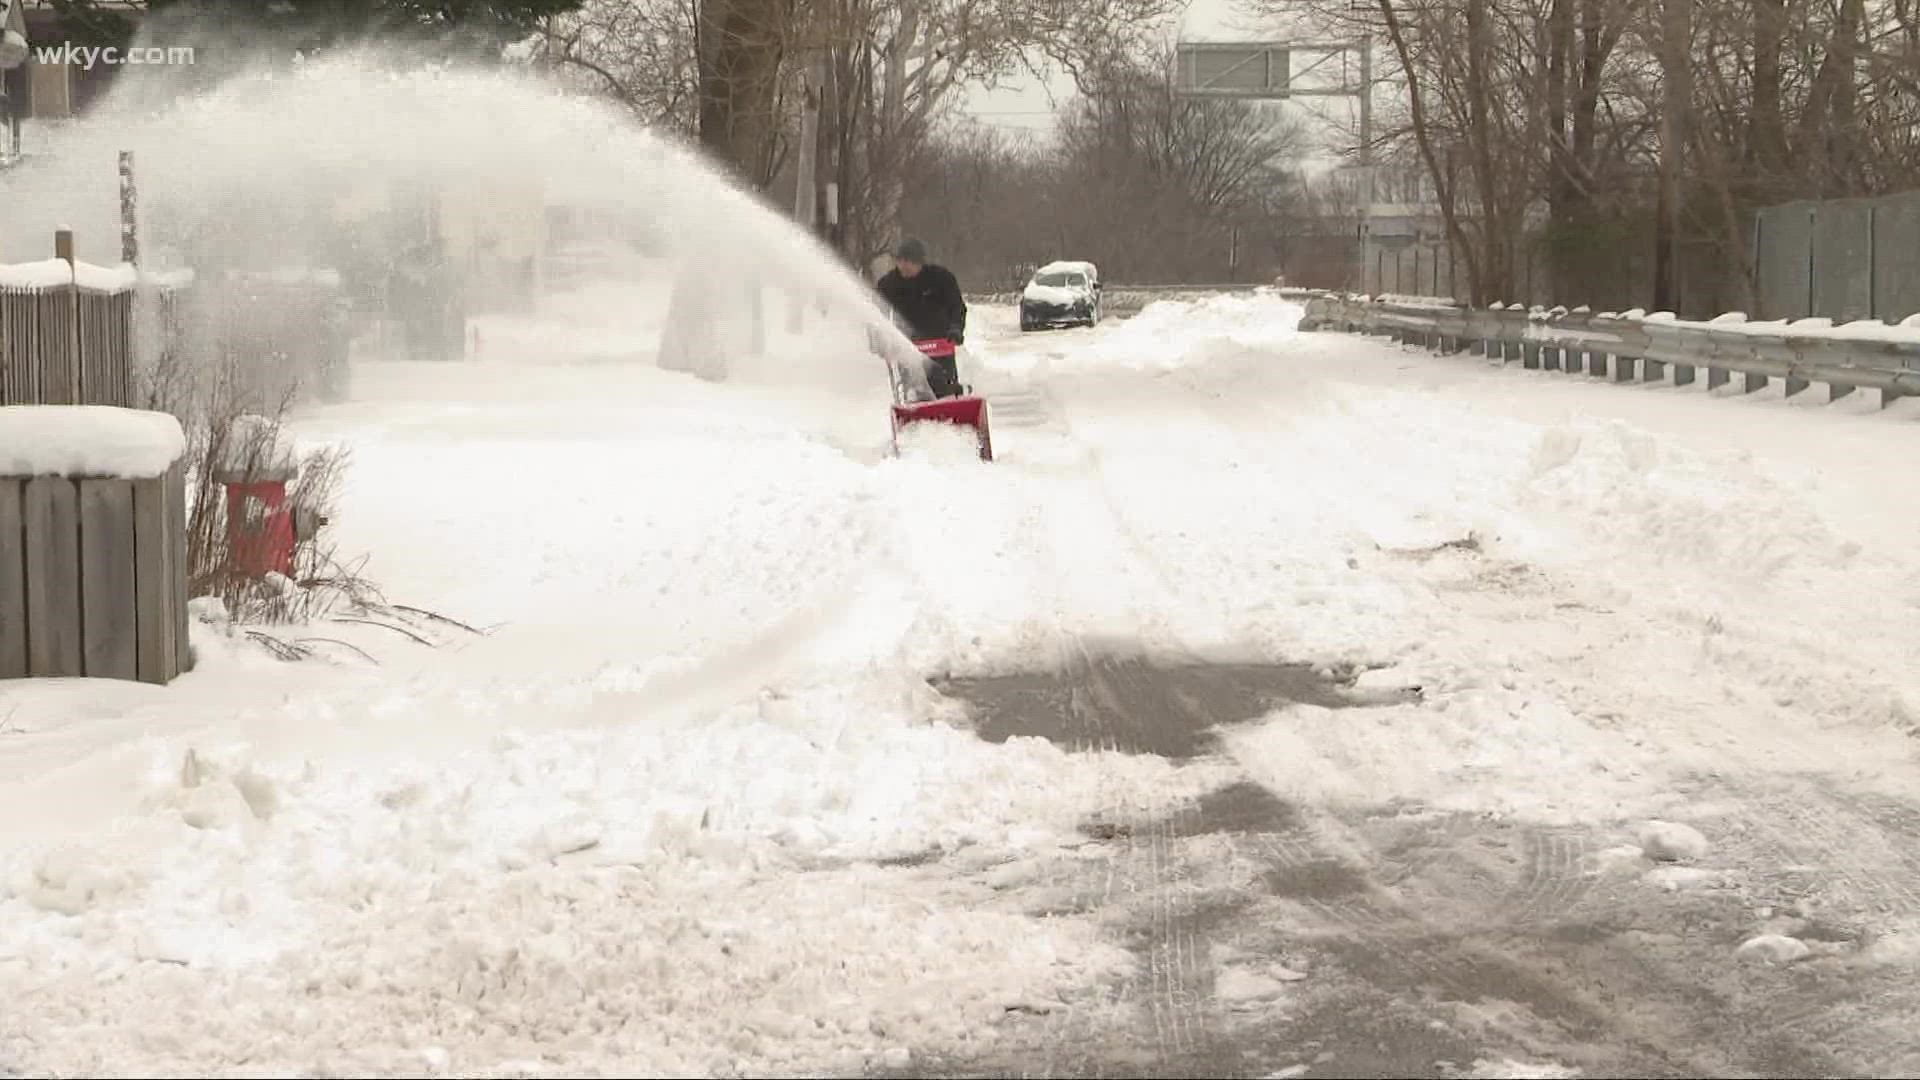 After over a foot of snow fell in parts of Northeast Ohio Sunday into Monday, many are still digging out.